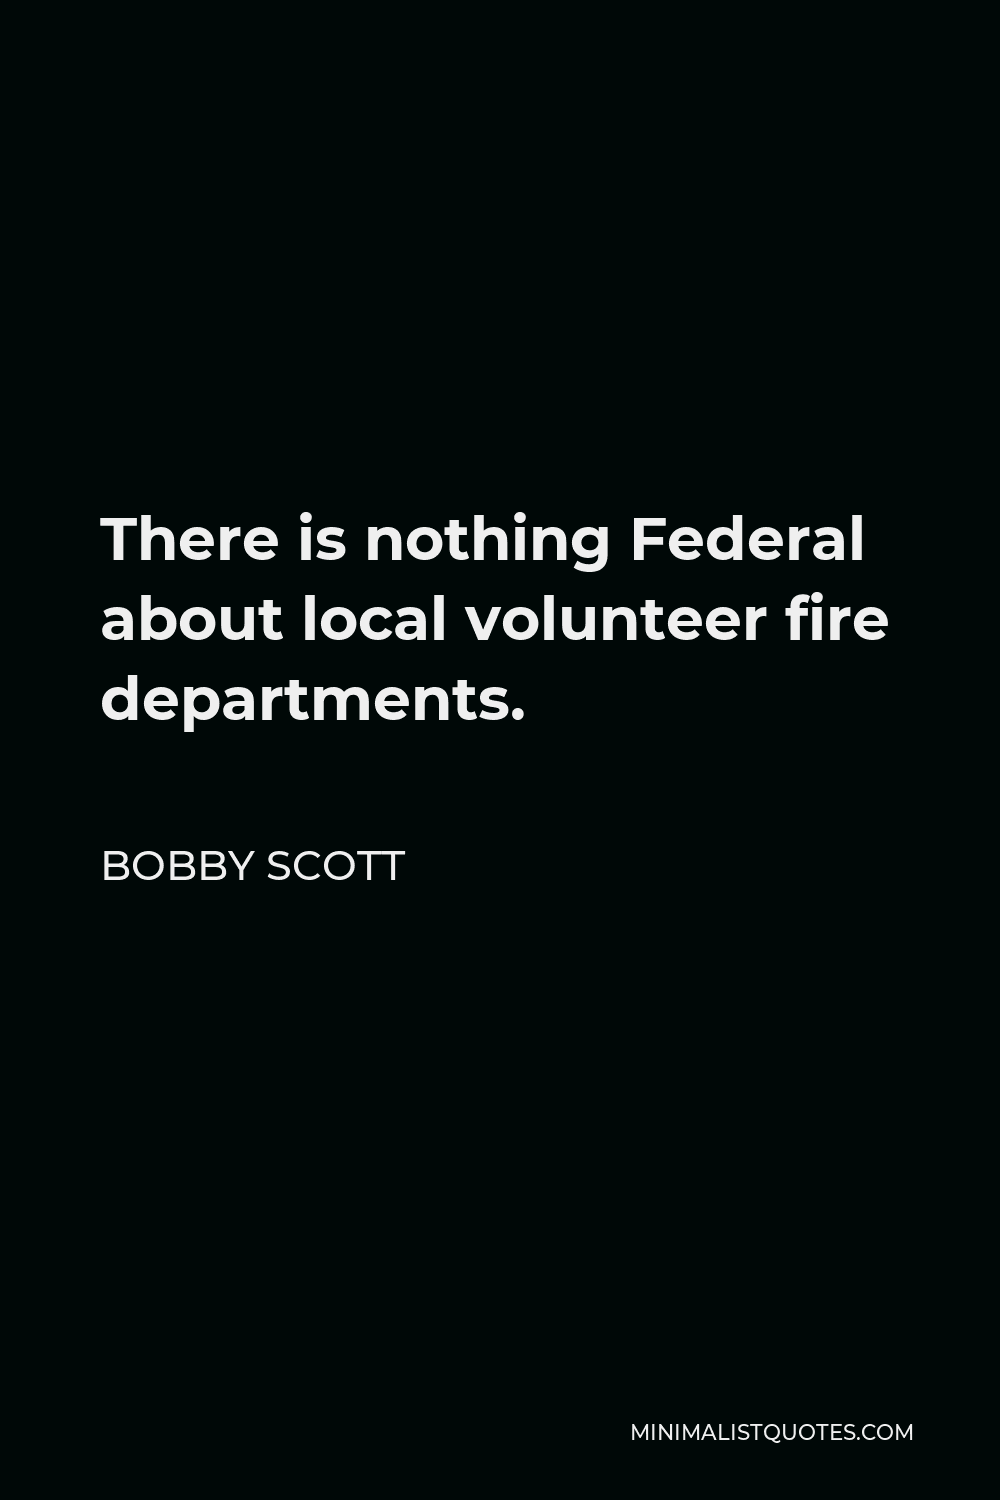 Bobby Scott Quote - There is nothing Federal about local volunteer fire departments.